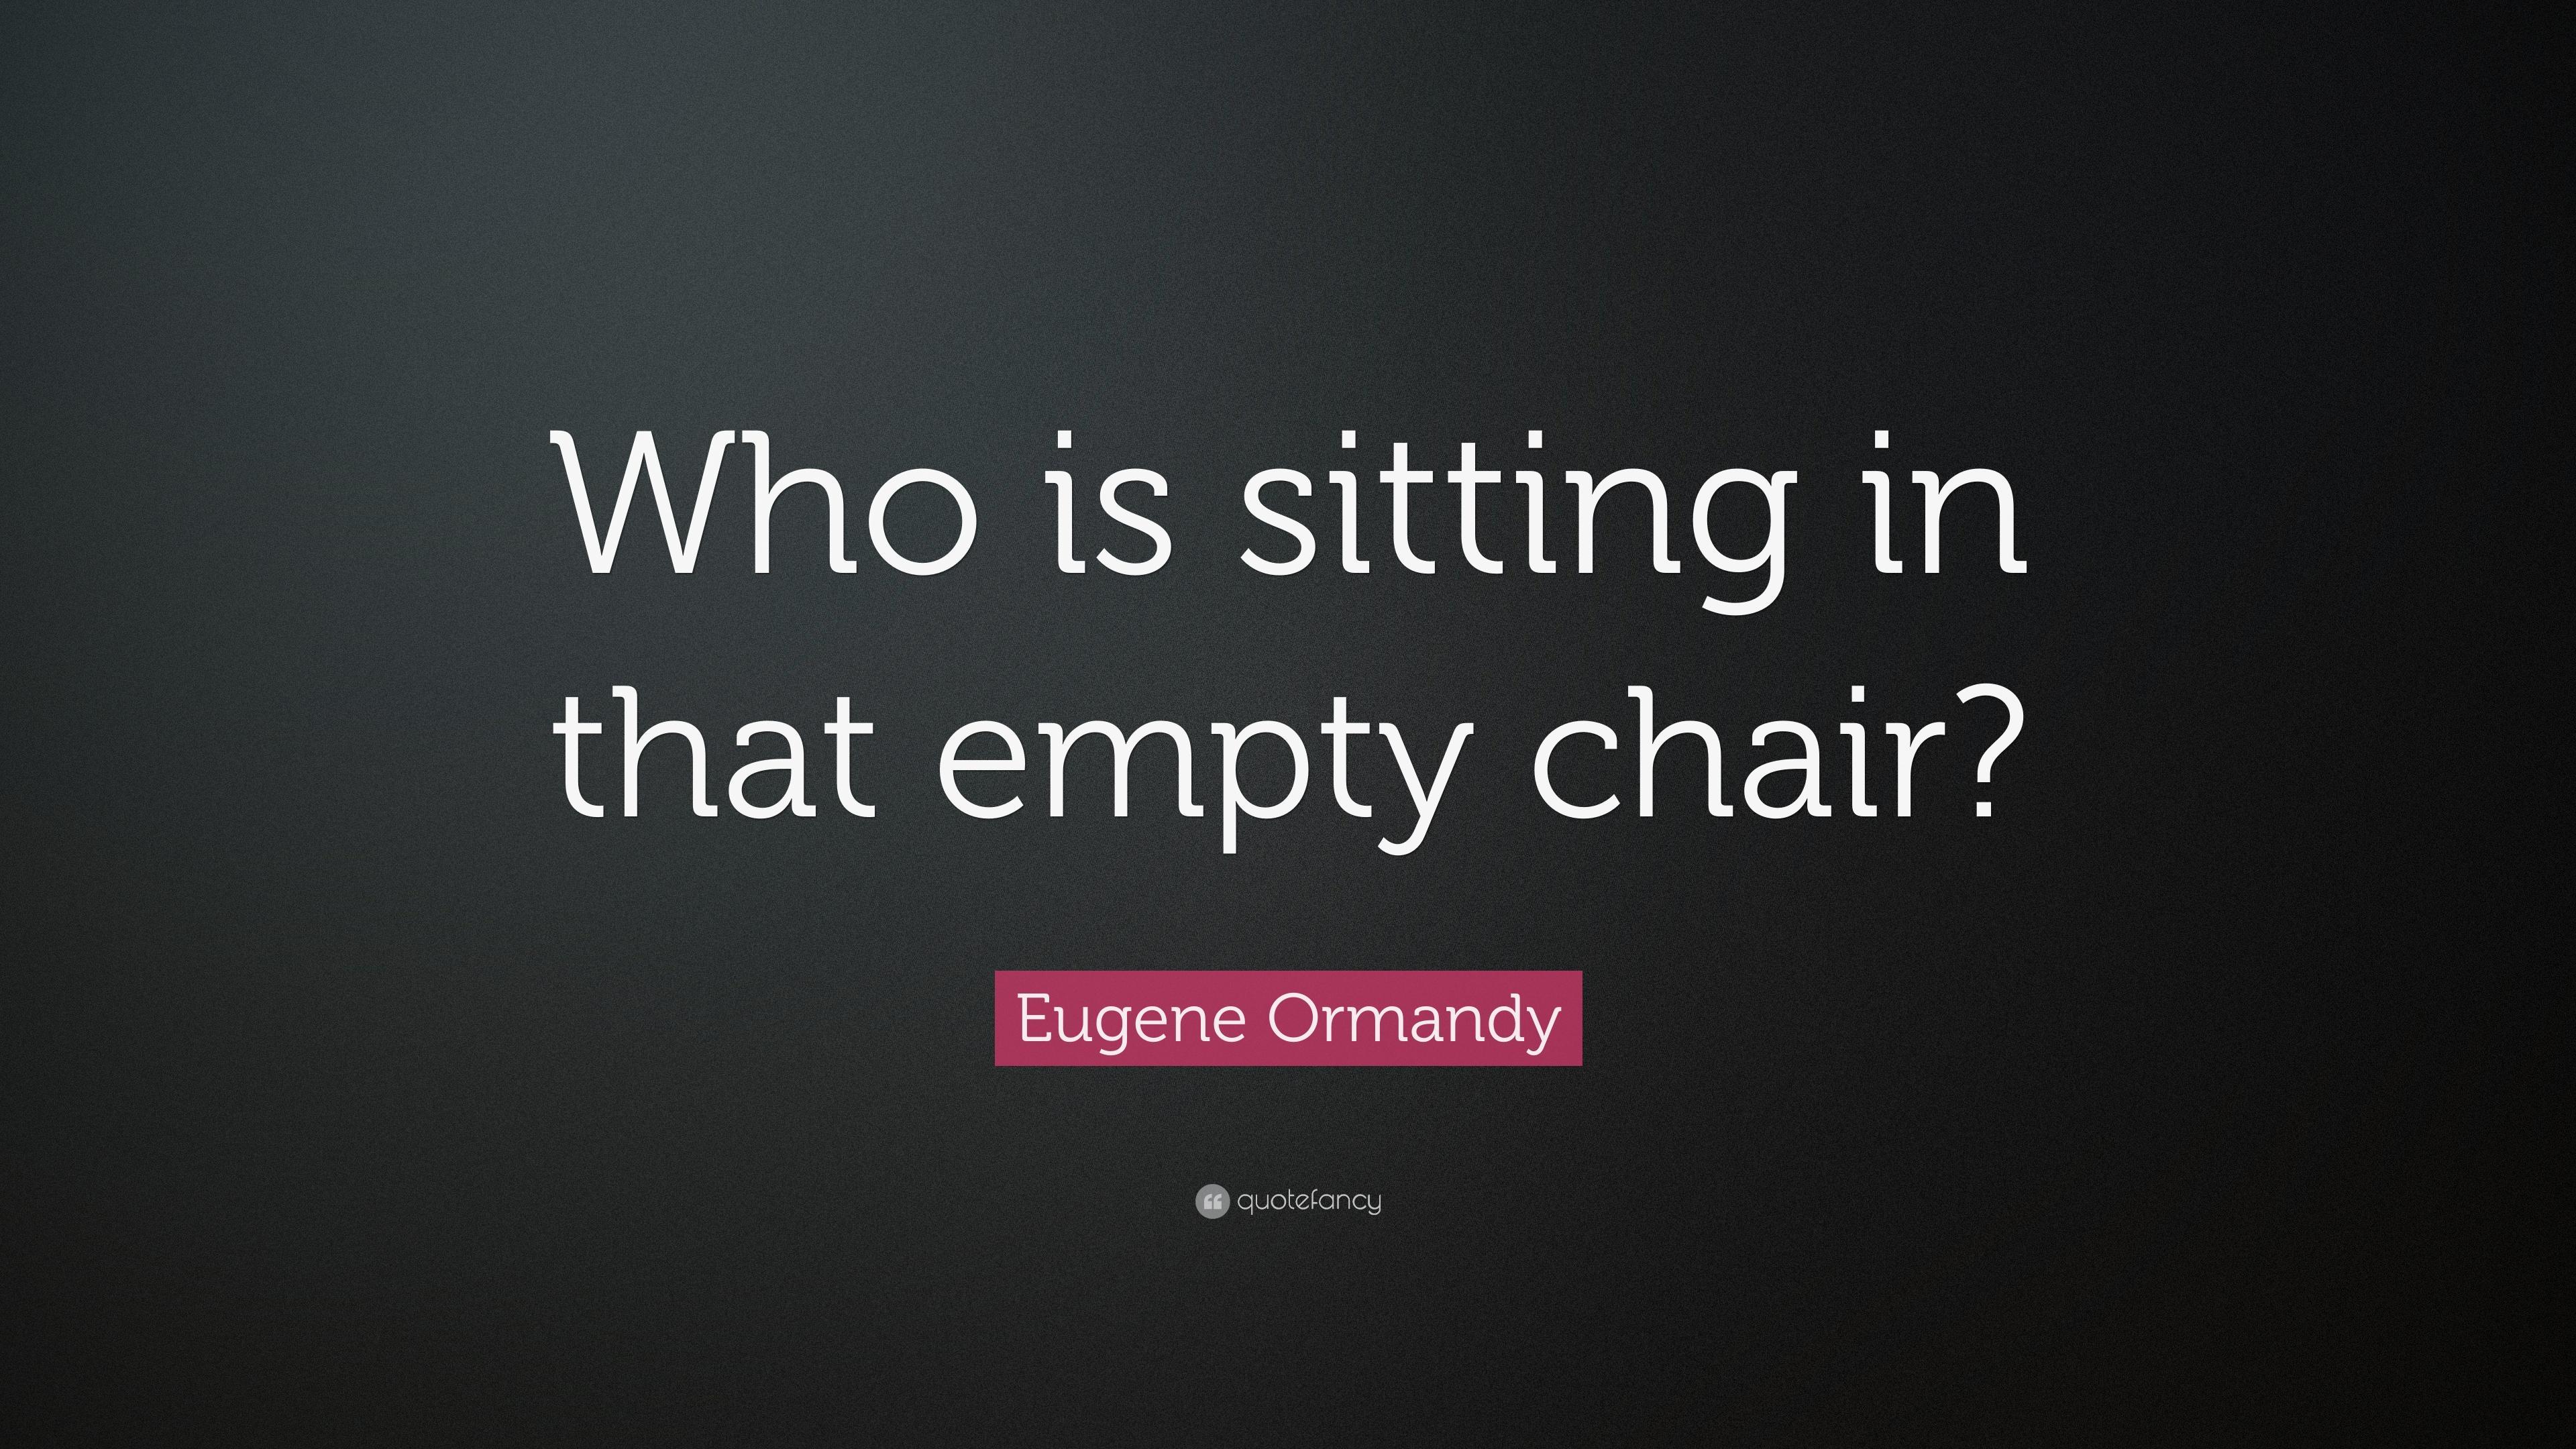 Eugene Ormandy Quote: “Who is sitting in that empty chair?” 7